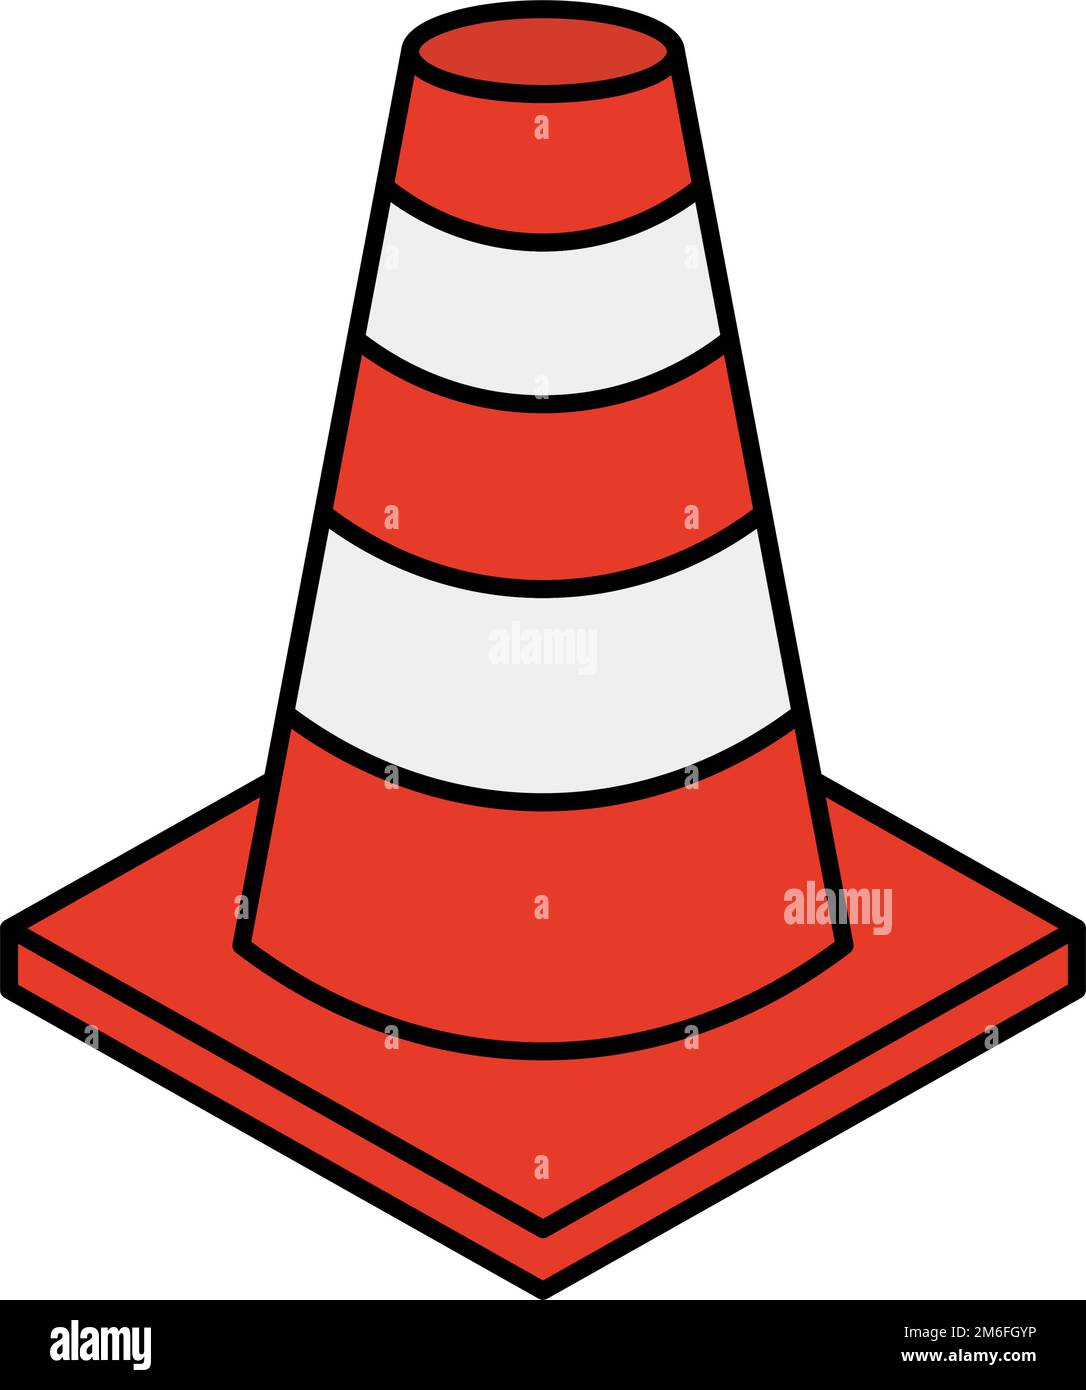 Road cone icon. Traffic maintenance item. Pylon and safety cone. Editable vector. Stock Vector